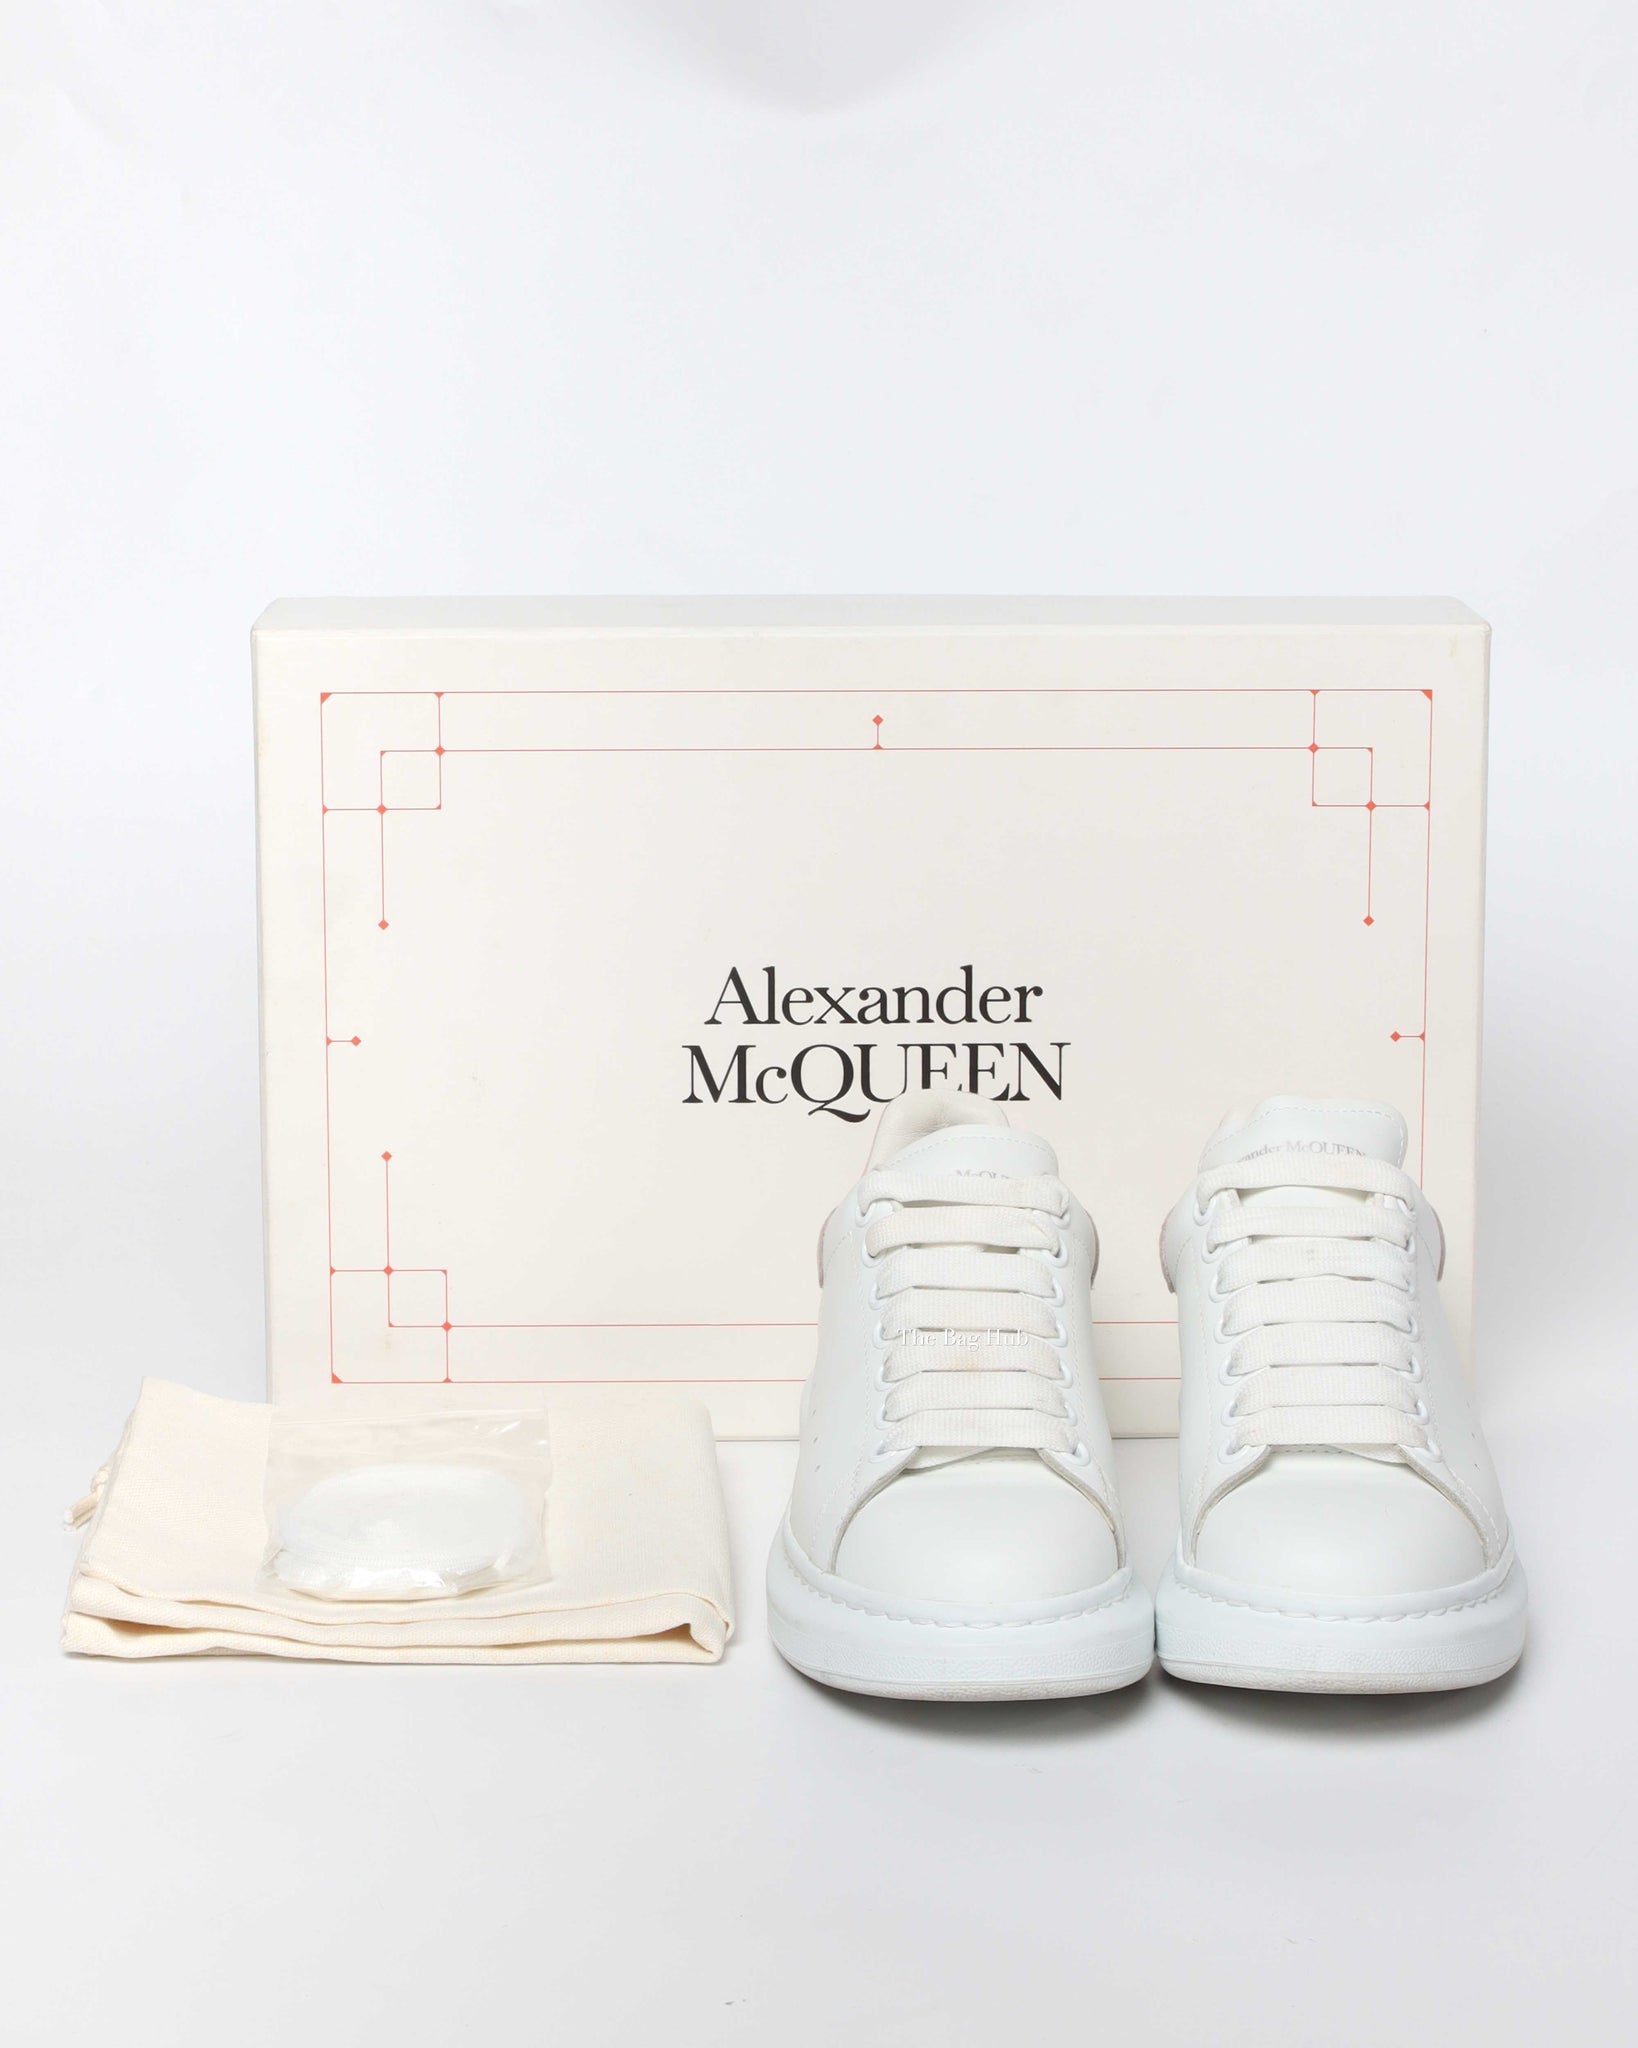 Alexander McQueen White & Pink Oversized Sneakers Size 37 - 9